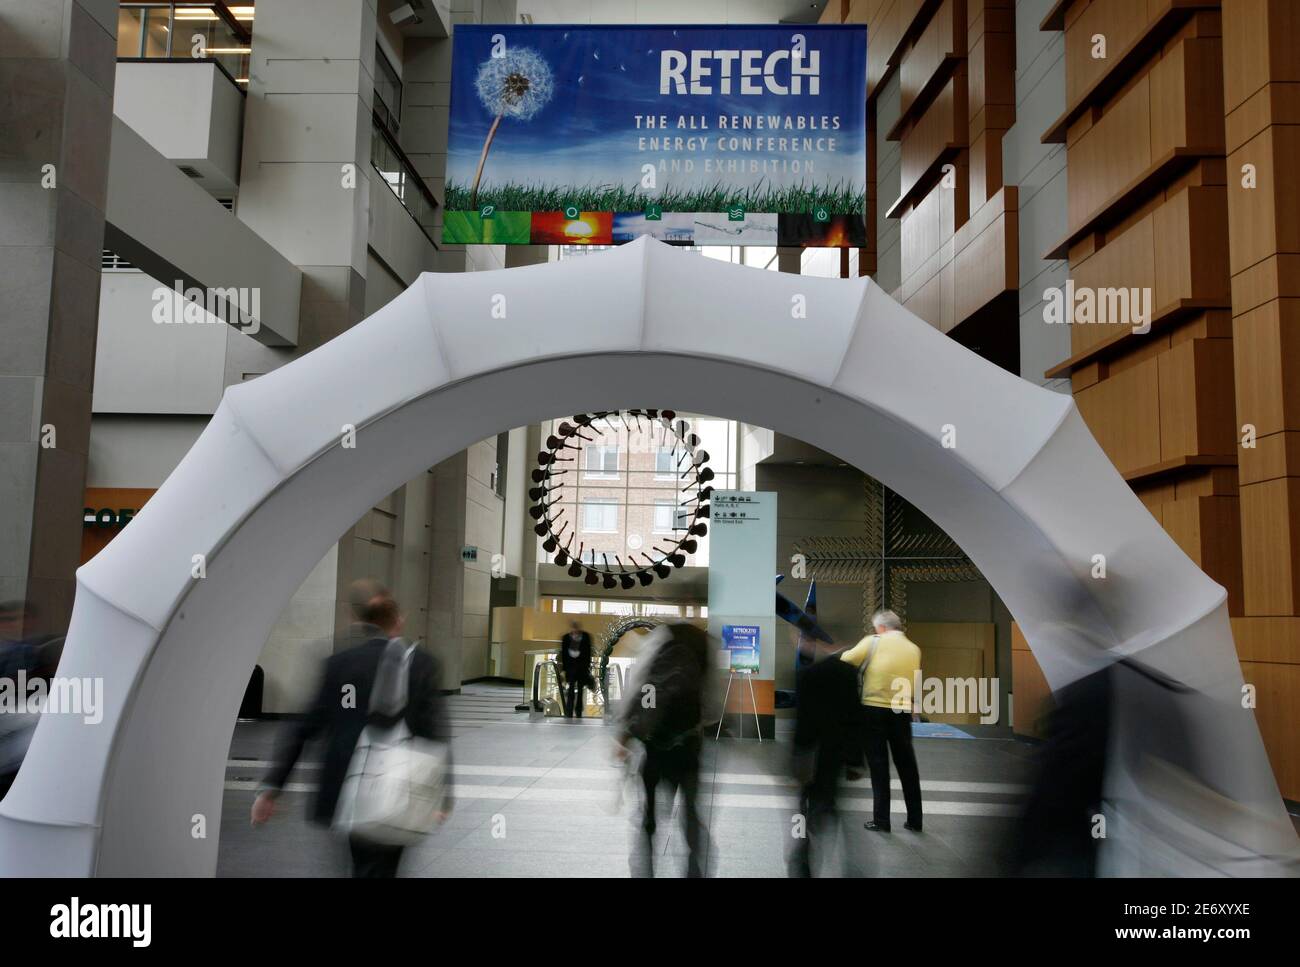 Participants at the 2010 Renewable Energy Technology Conference and Exhibition (RETECH 2010) walk at the entrance to the Exhibit Hall in Washington, February 4, 2010. REUTERS/Hyungwon Kang    (UNITED STATES - Tags: ENERGY BUSINESS SCI TECH) Stock Photo